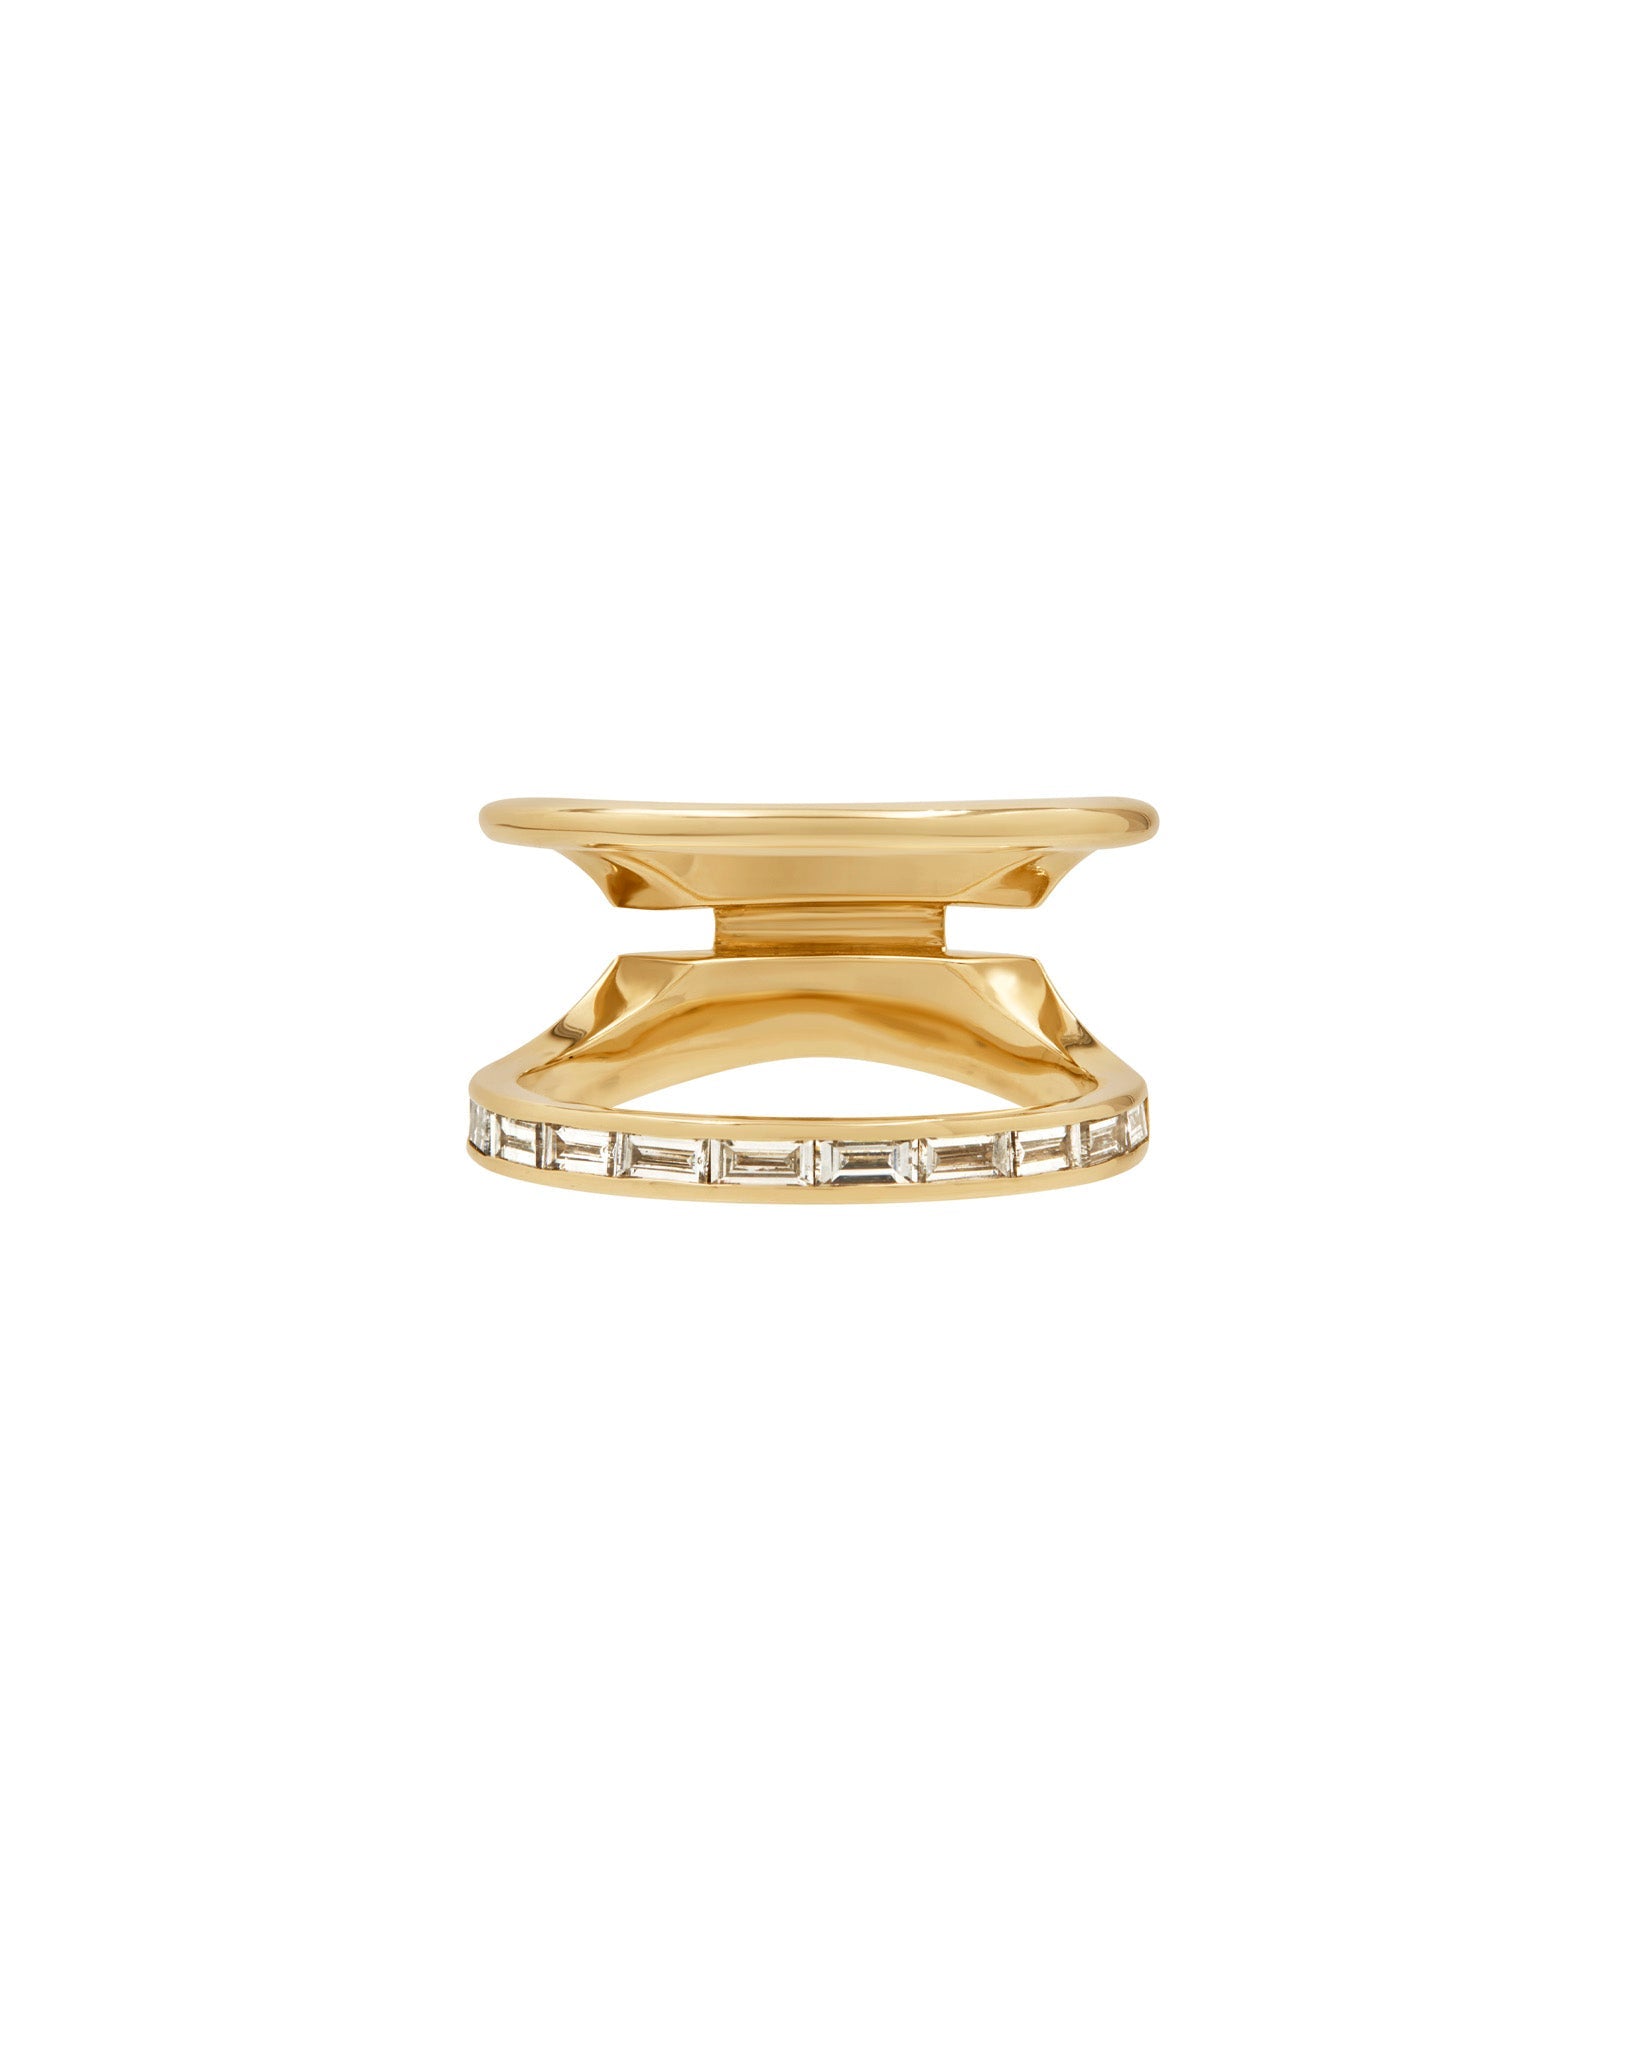 Bliss Lau Cascade Enclose Ring in recycled gold and baguette diamonds.